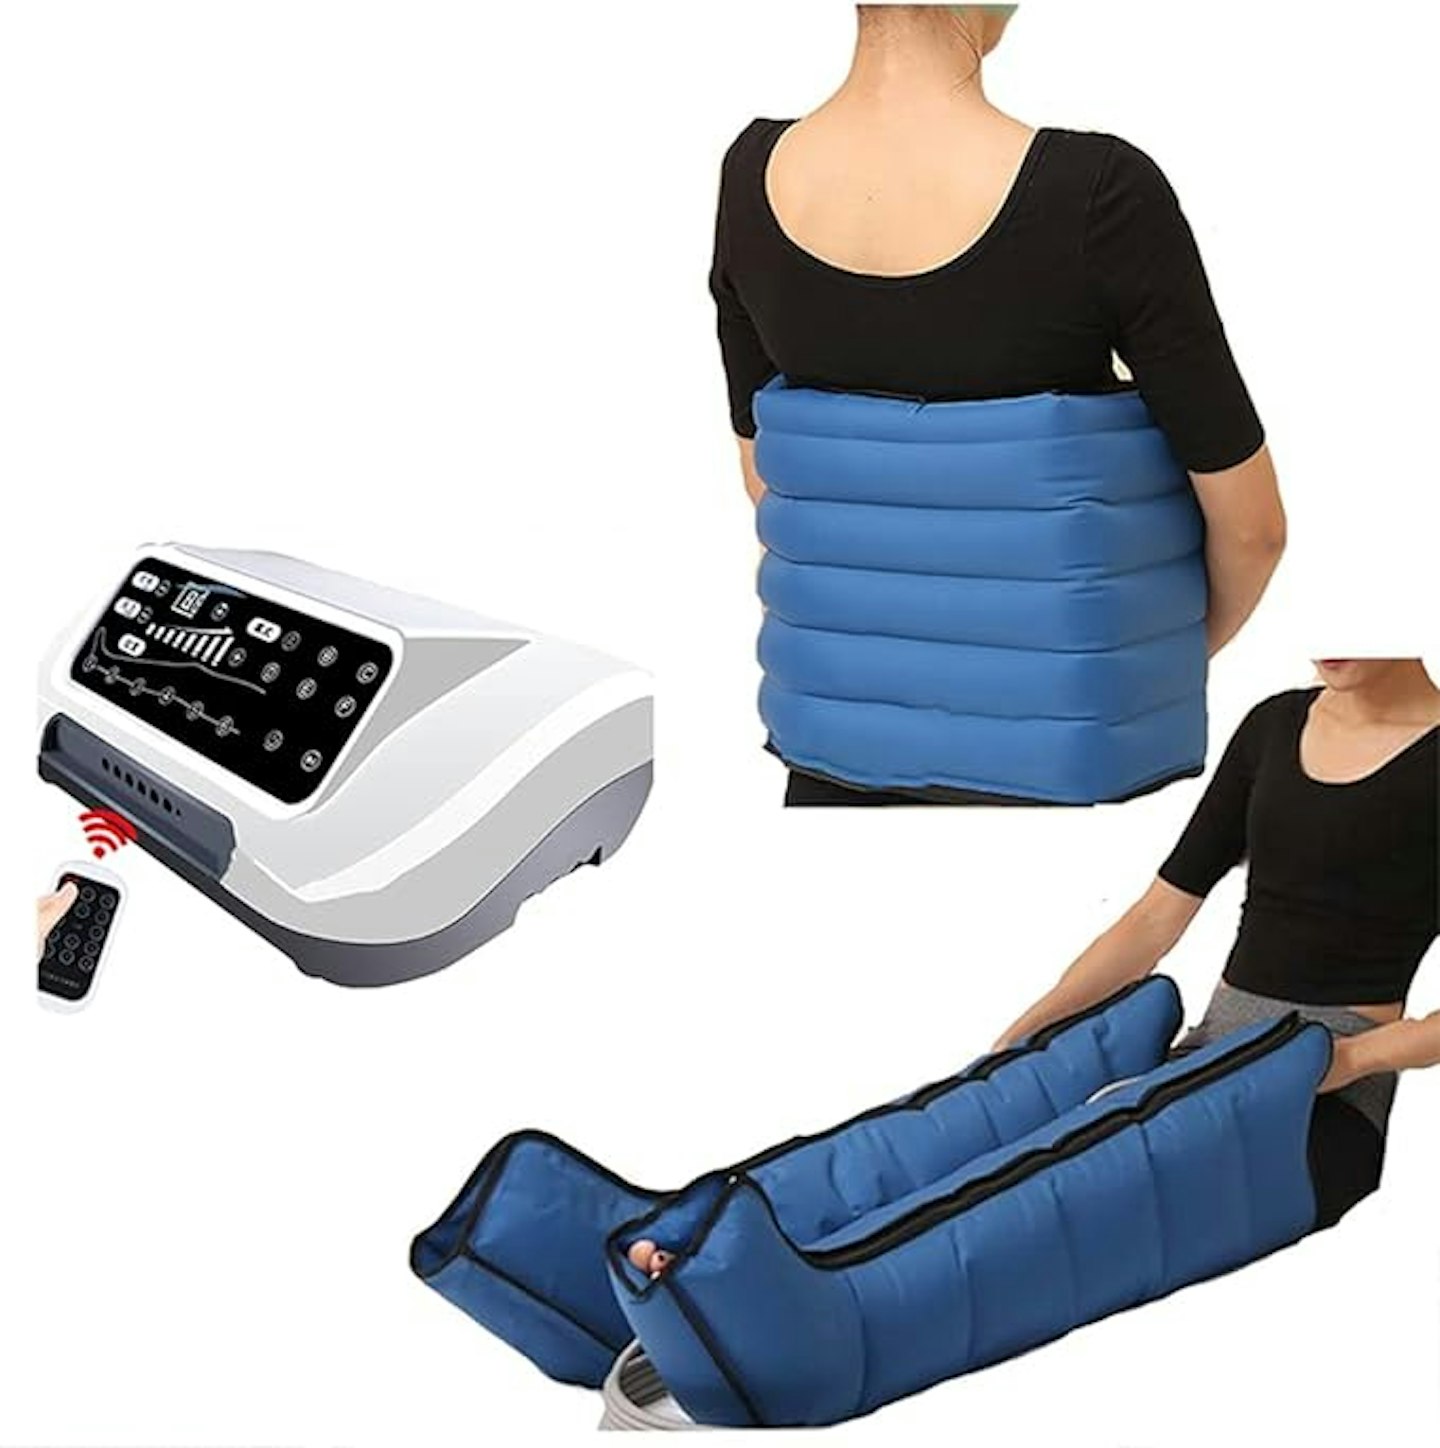 Slimming Pressotherapy Air Compression Leg Foot Massager